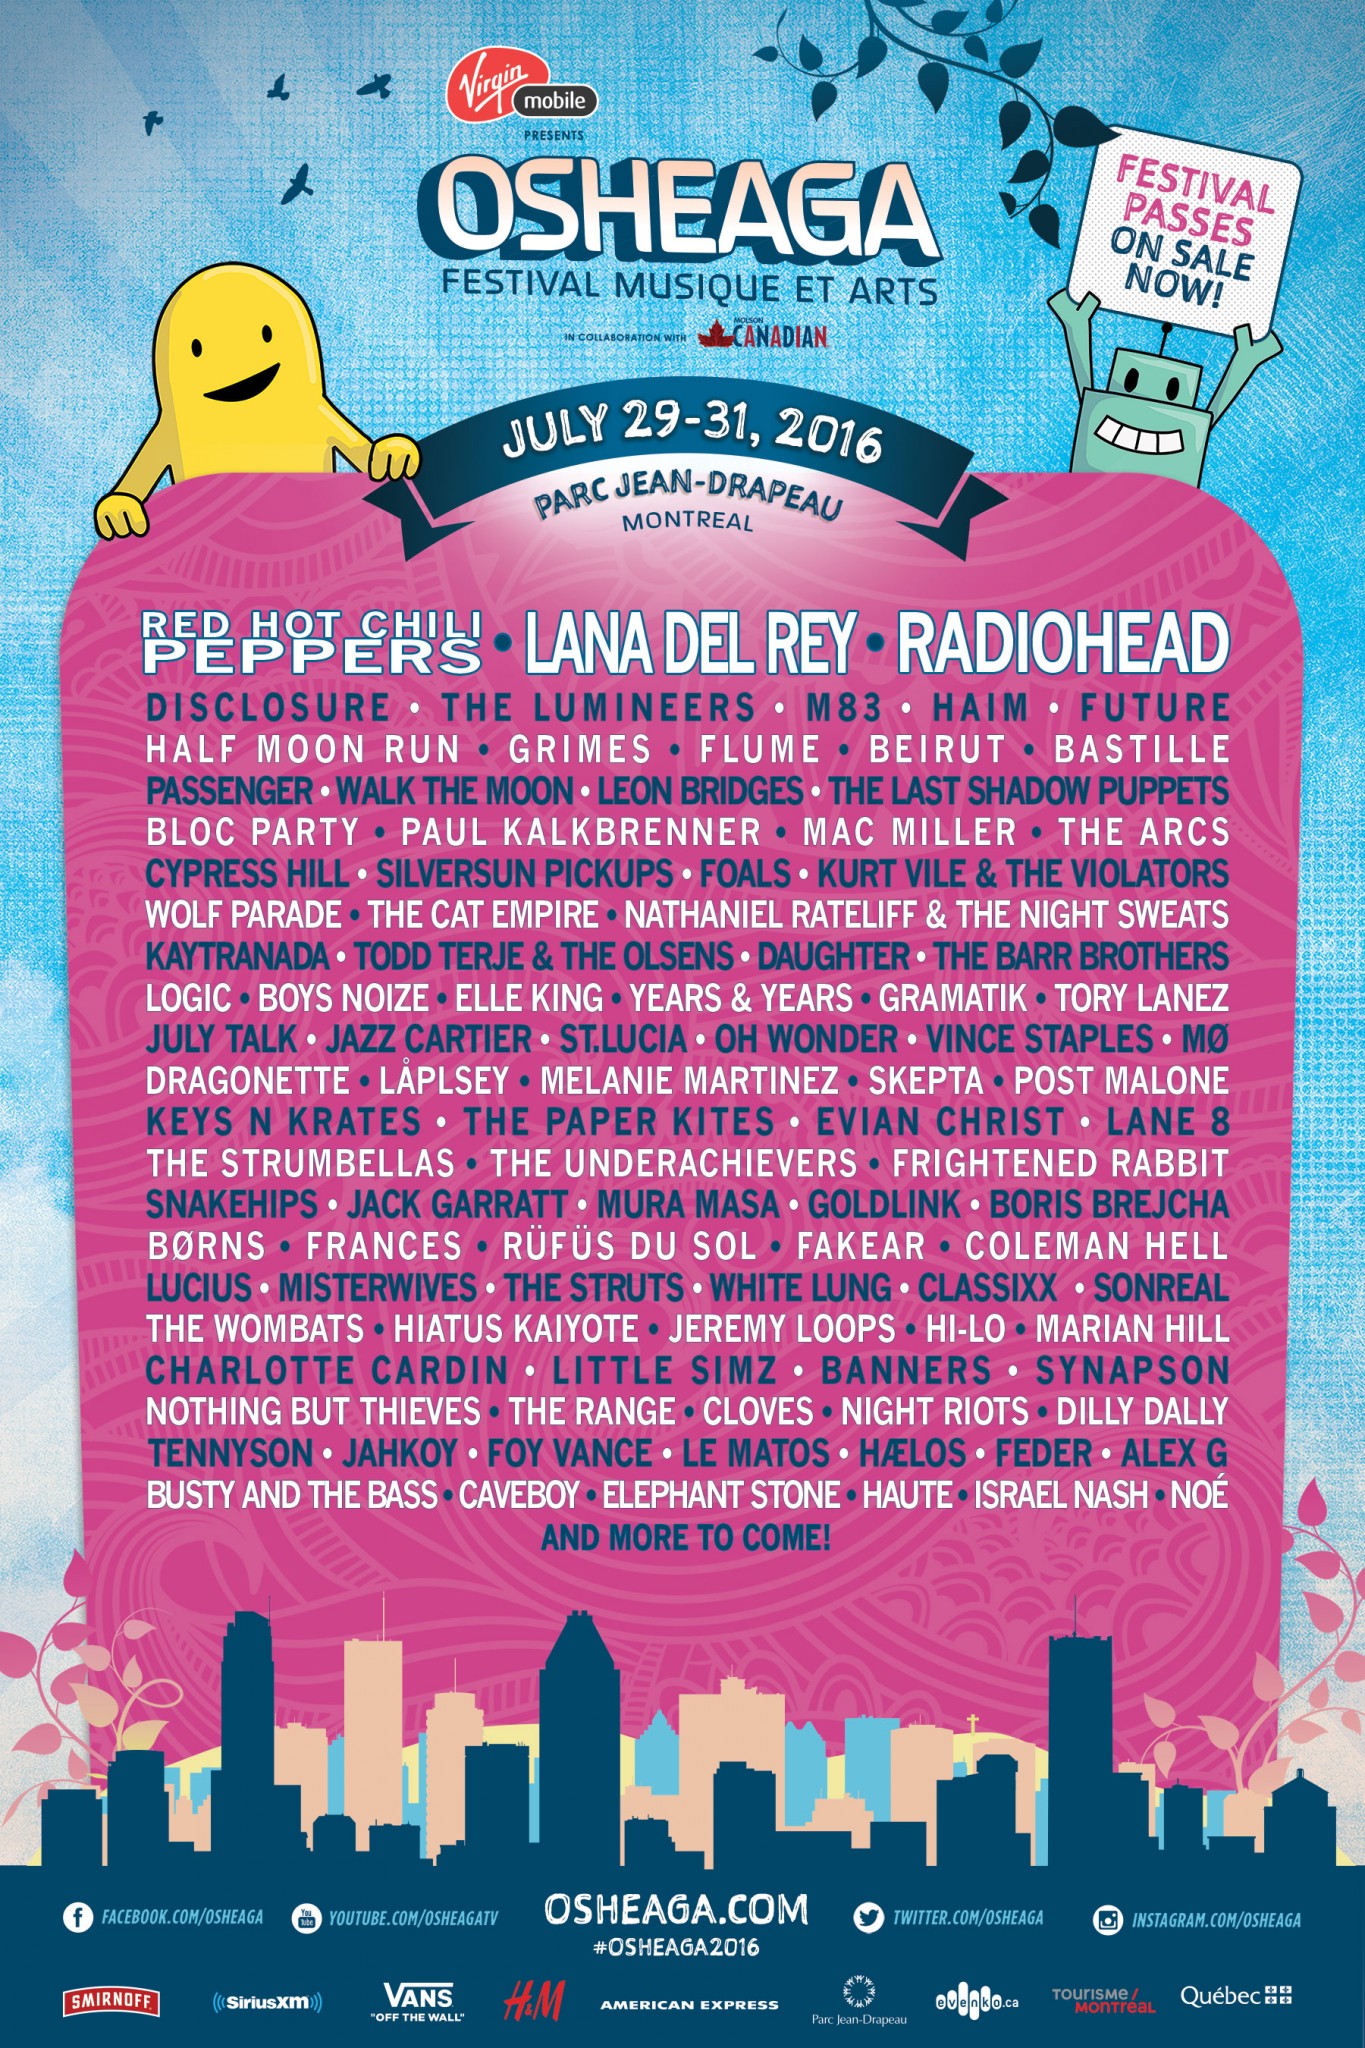 Osheaga Festival 2016 Lineup: Radiohead, Red Hot Chili Peppers, and Lana Del Rey